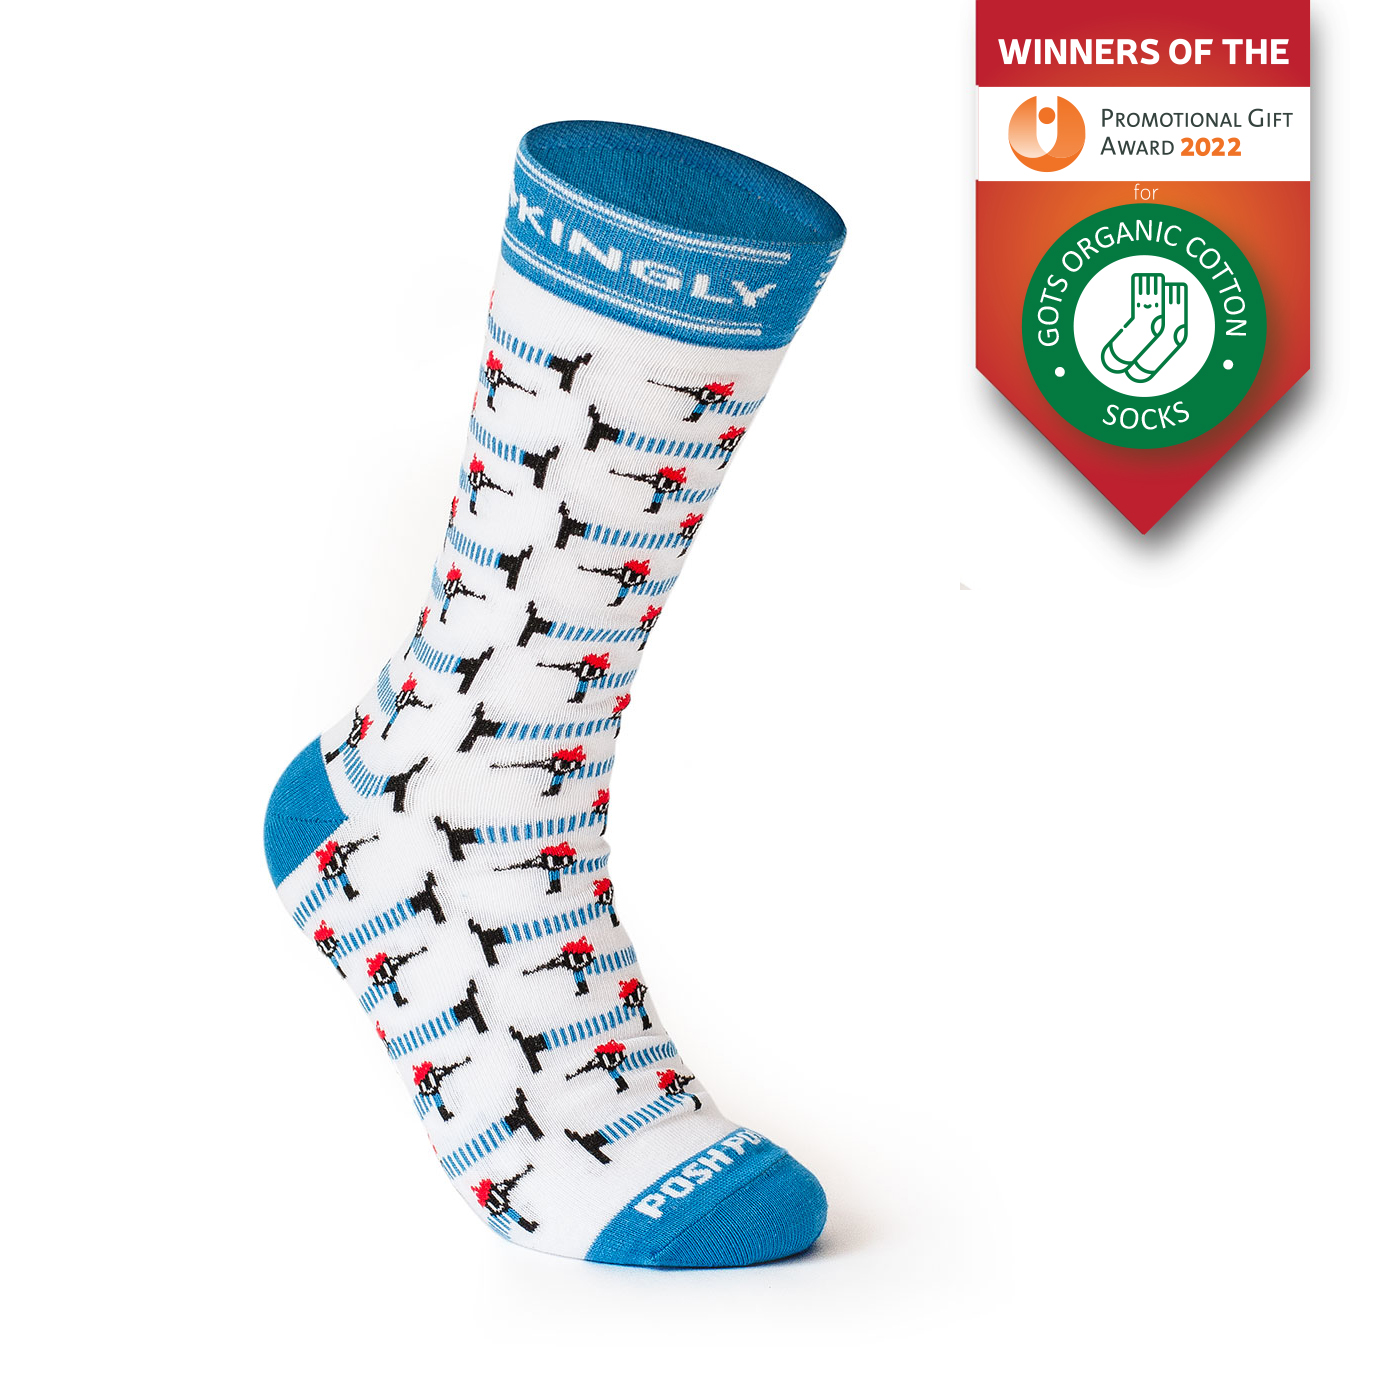 Kingly's 3 Best-Selling Crew Socks rated by BCome's Sustainability Platform